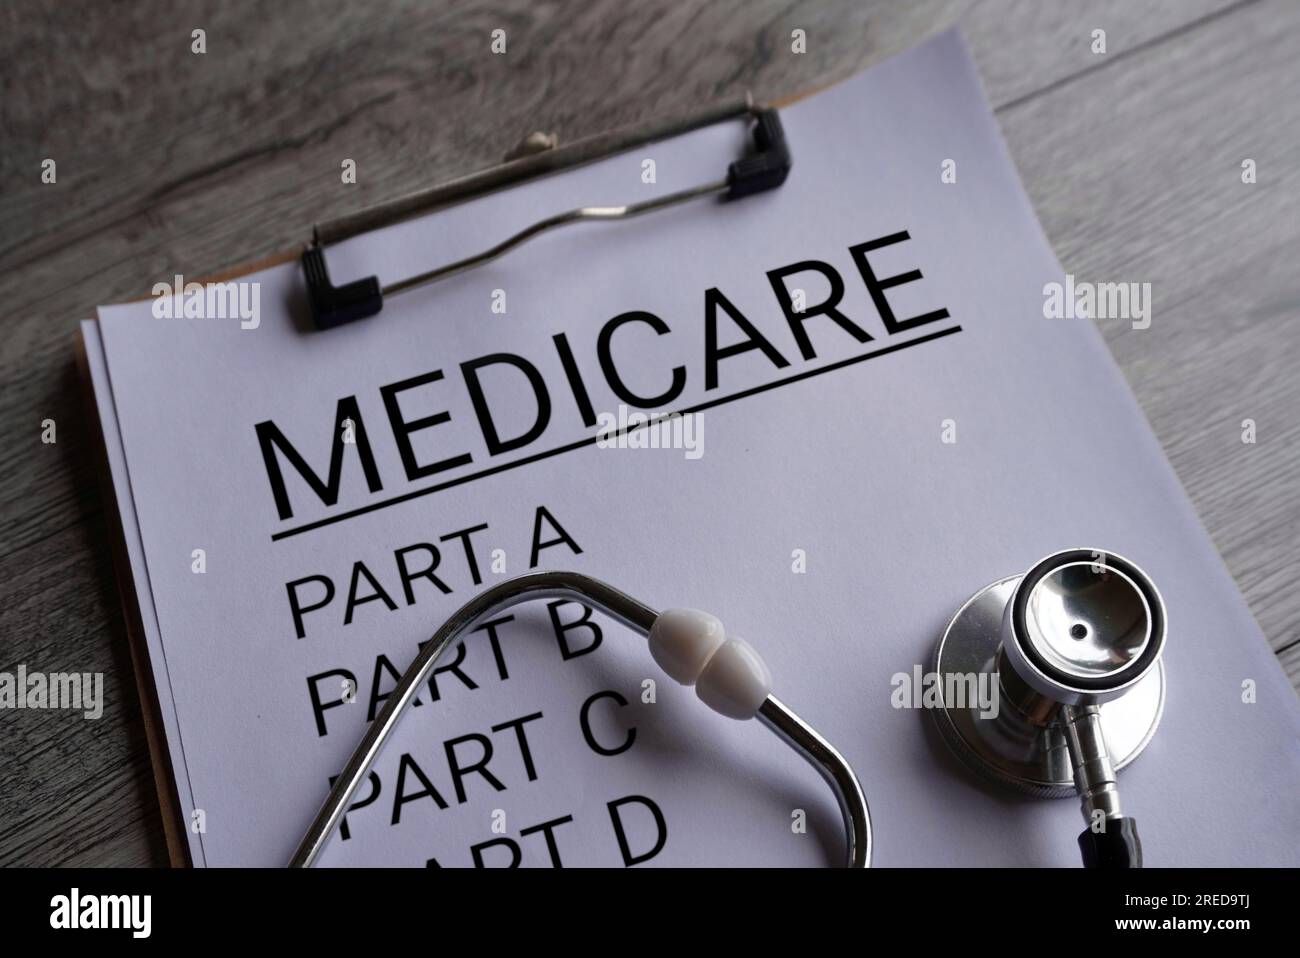 Close up image of stethoscope and paper clipboard with text MEDICARE and part list. Medical and healthcare concept Stock Photo